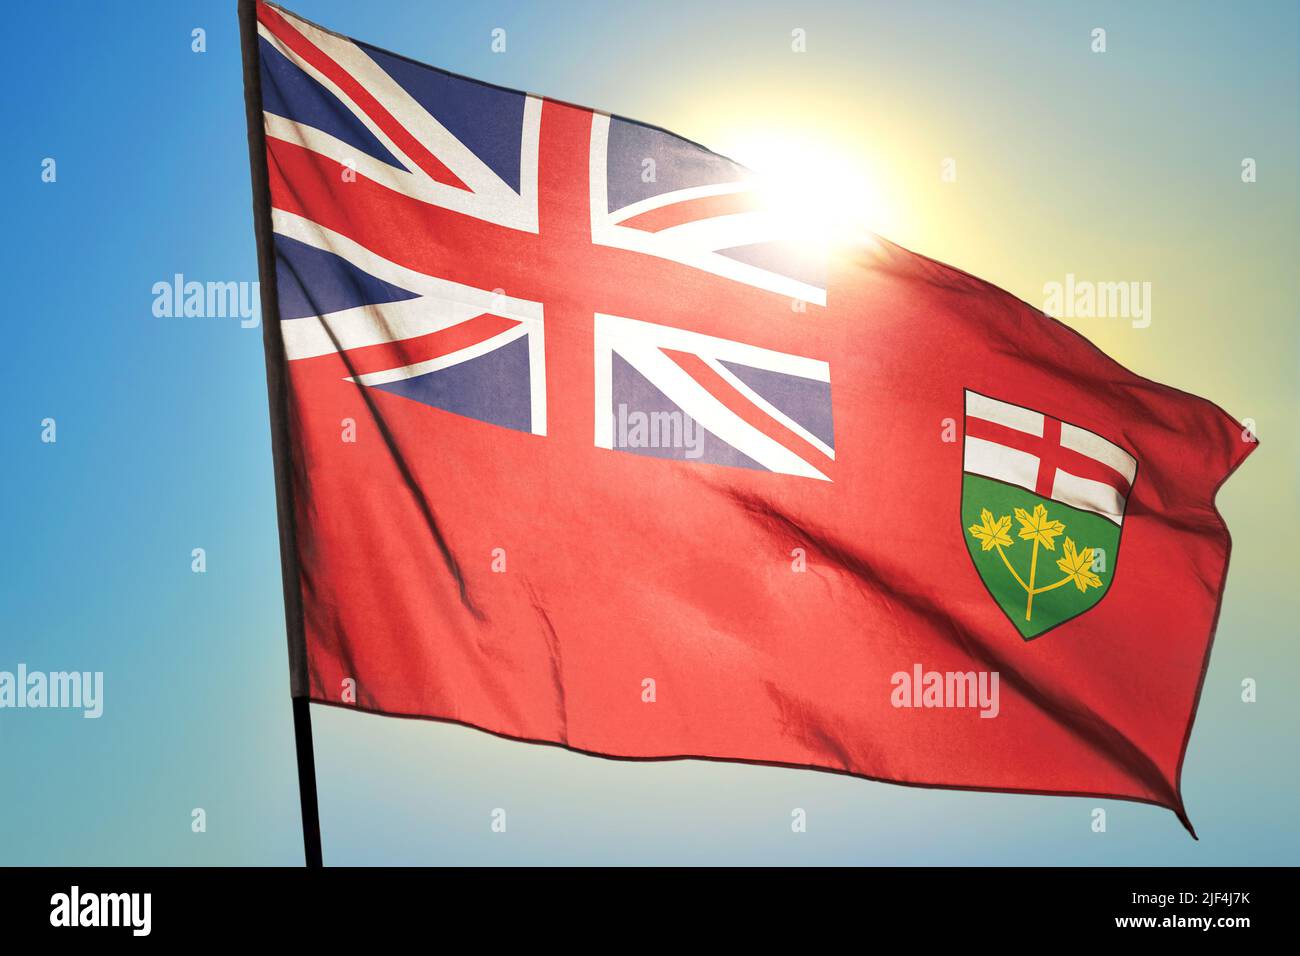 Ontario province of Canada flag waving on the wind Stock Photo